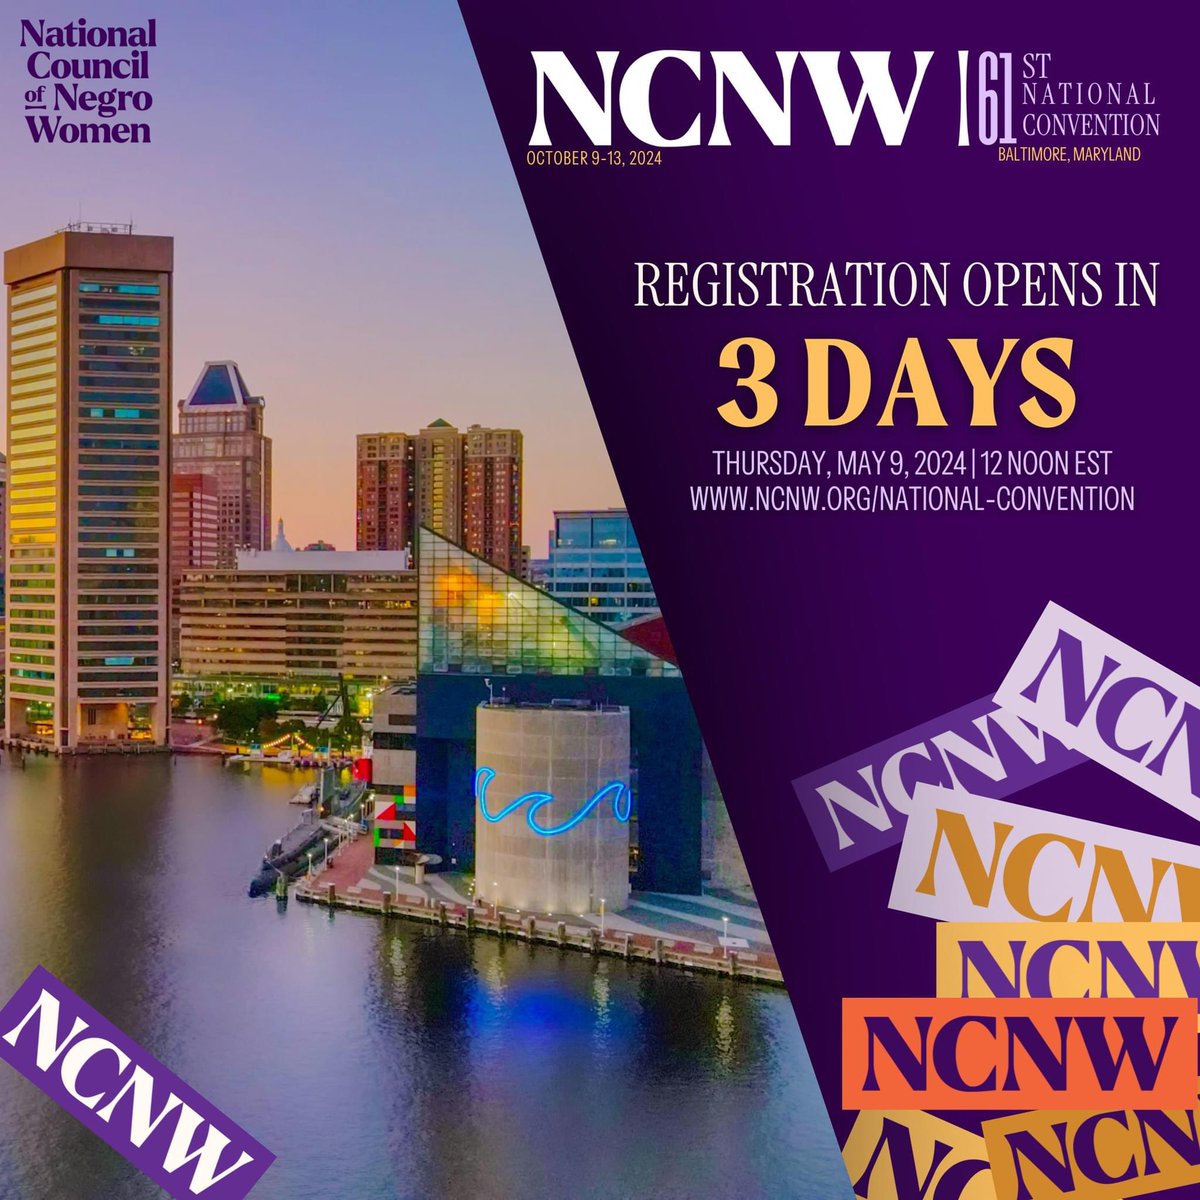 Just 3 days left until registration opens for our 61st National Convention! Get ready to secure your spot and join us for this memorable event. Stay tuned for more updates—we can't wait to have you with us! #NCNWStrong 💜